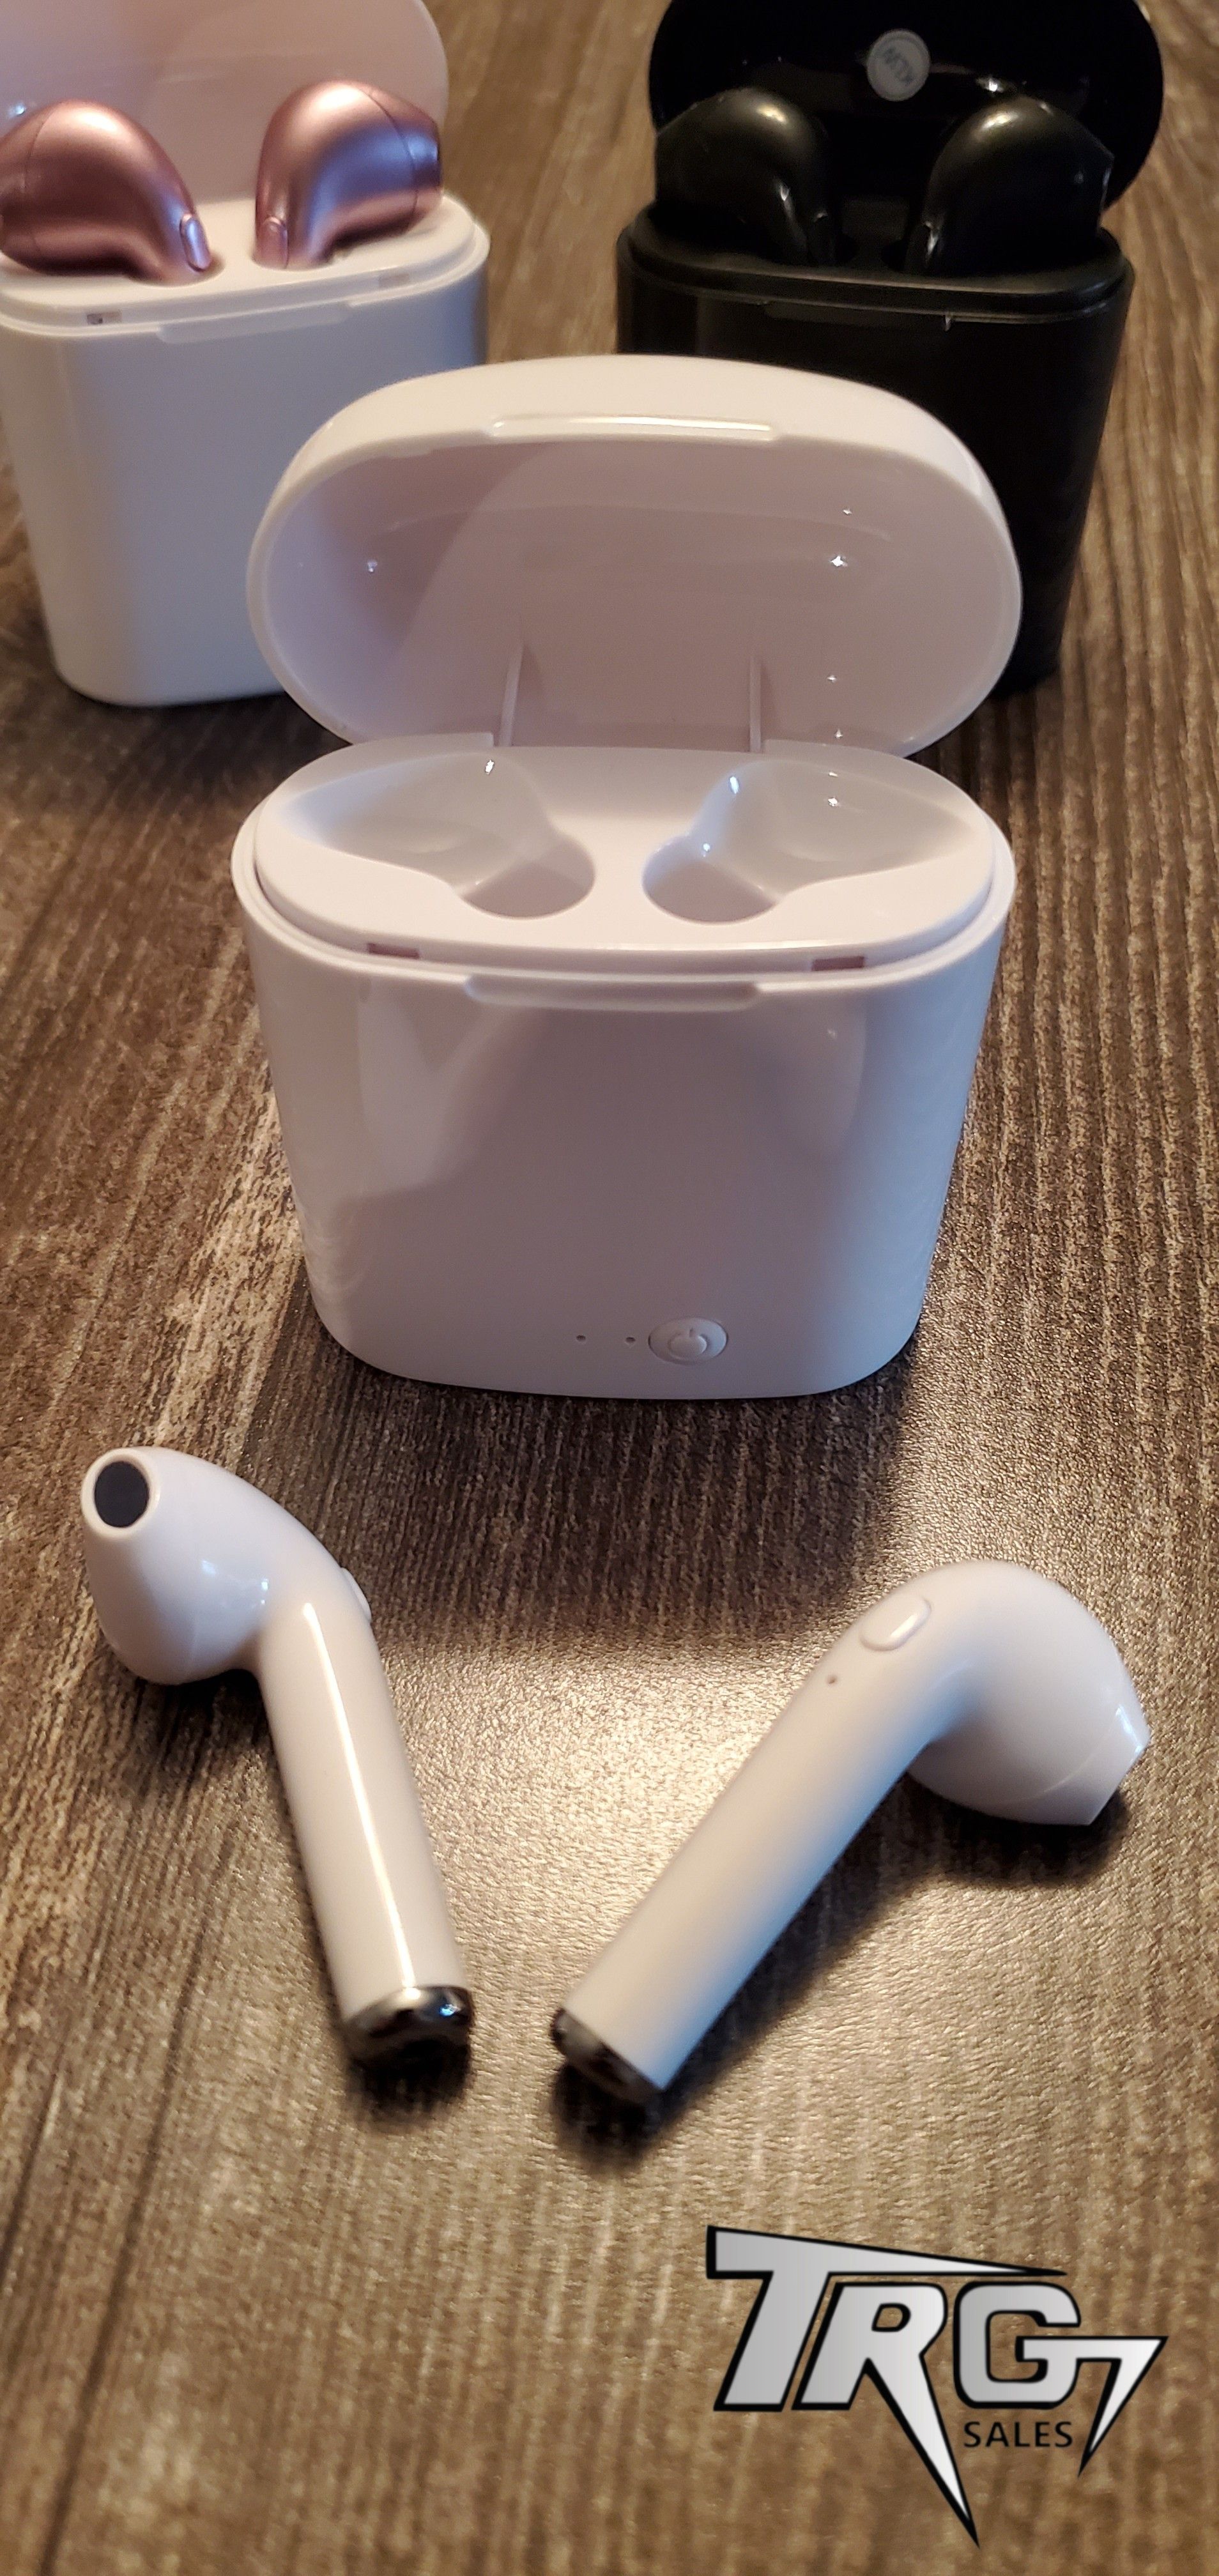 BRAND NEW EARPODS FOR ANDROID AND IPHONE 🎧 BUY 2 OR MORE PAIRS AND SAVE $$$$$